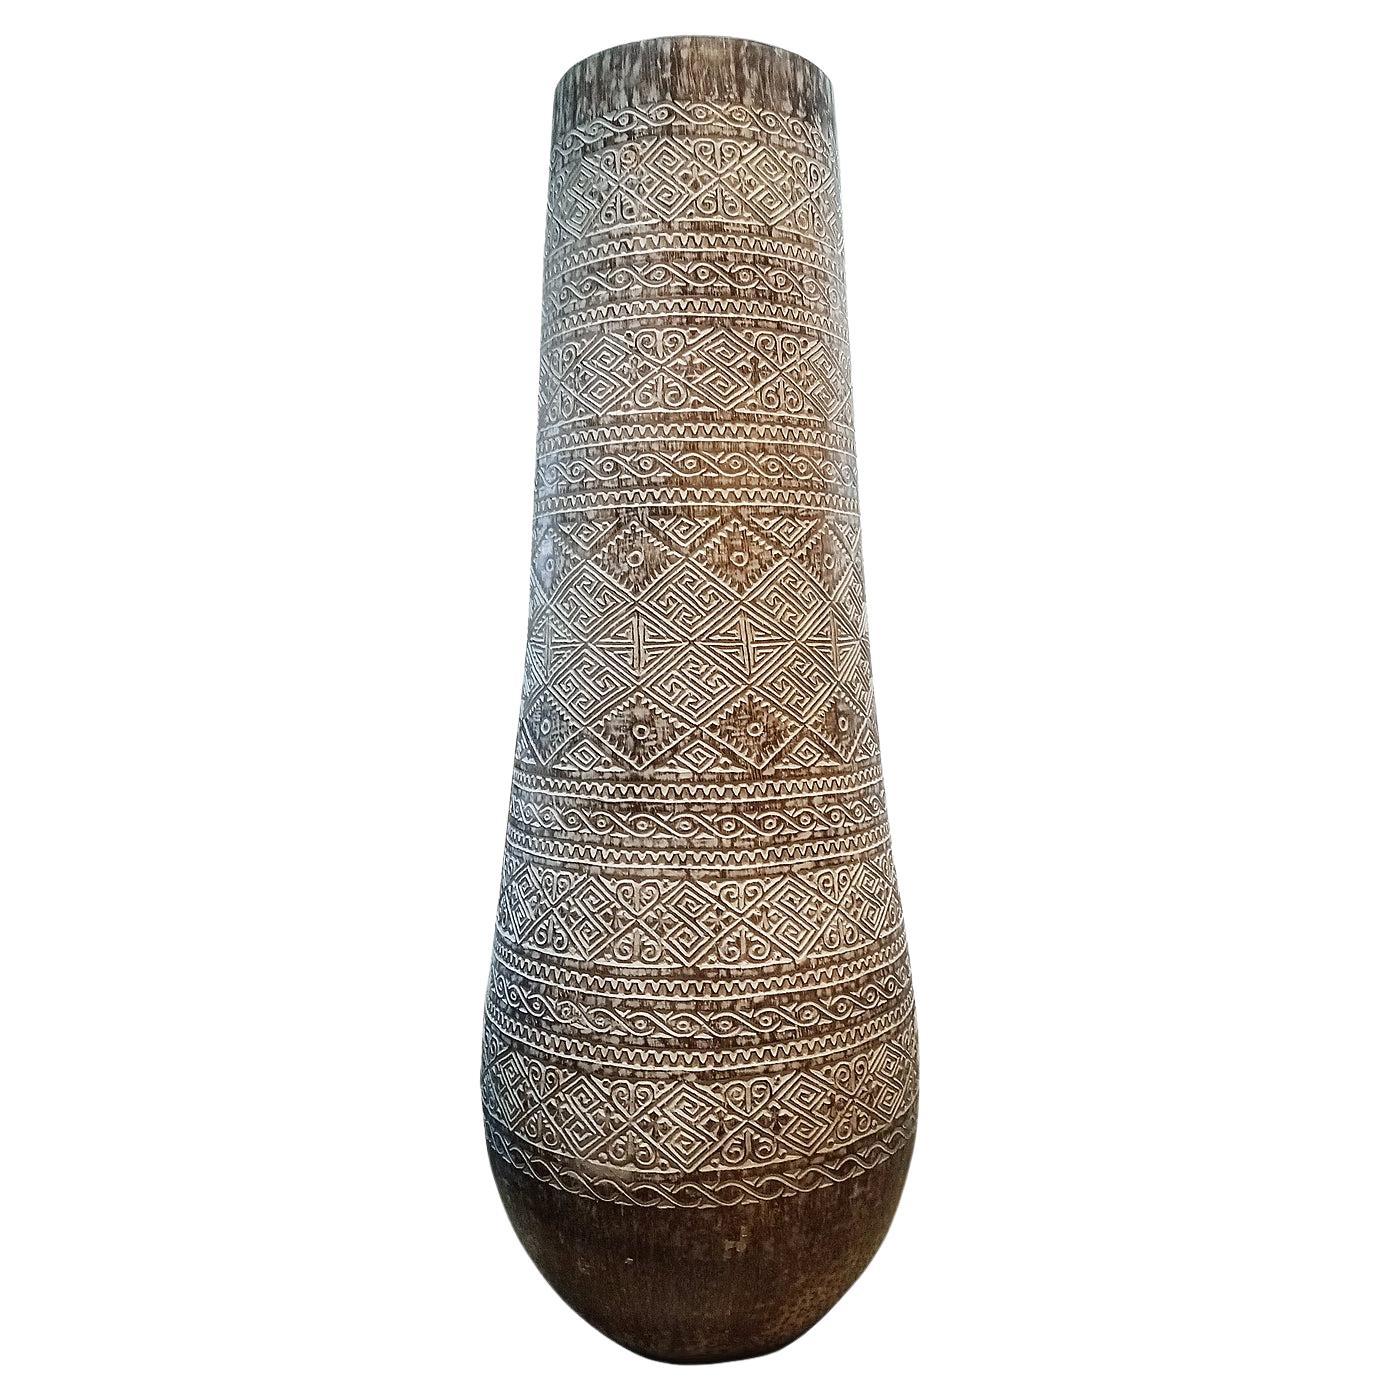 Tall Hand-Carved Palm Pot